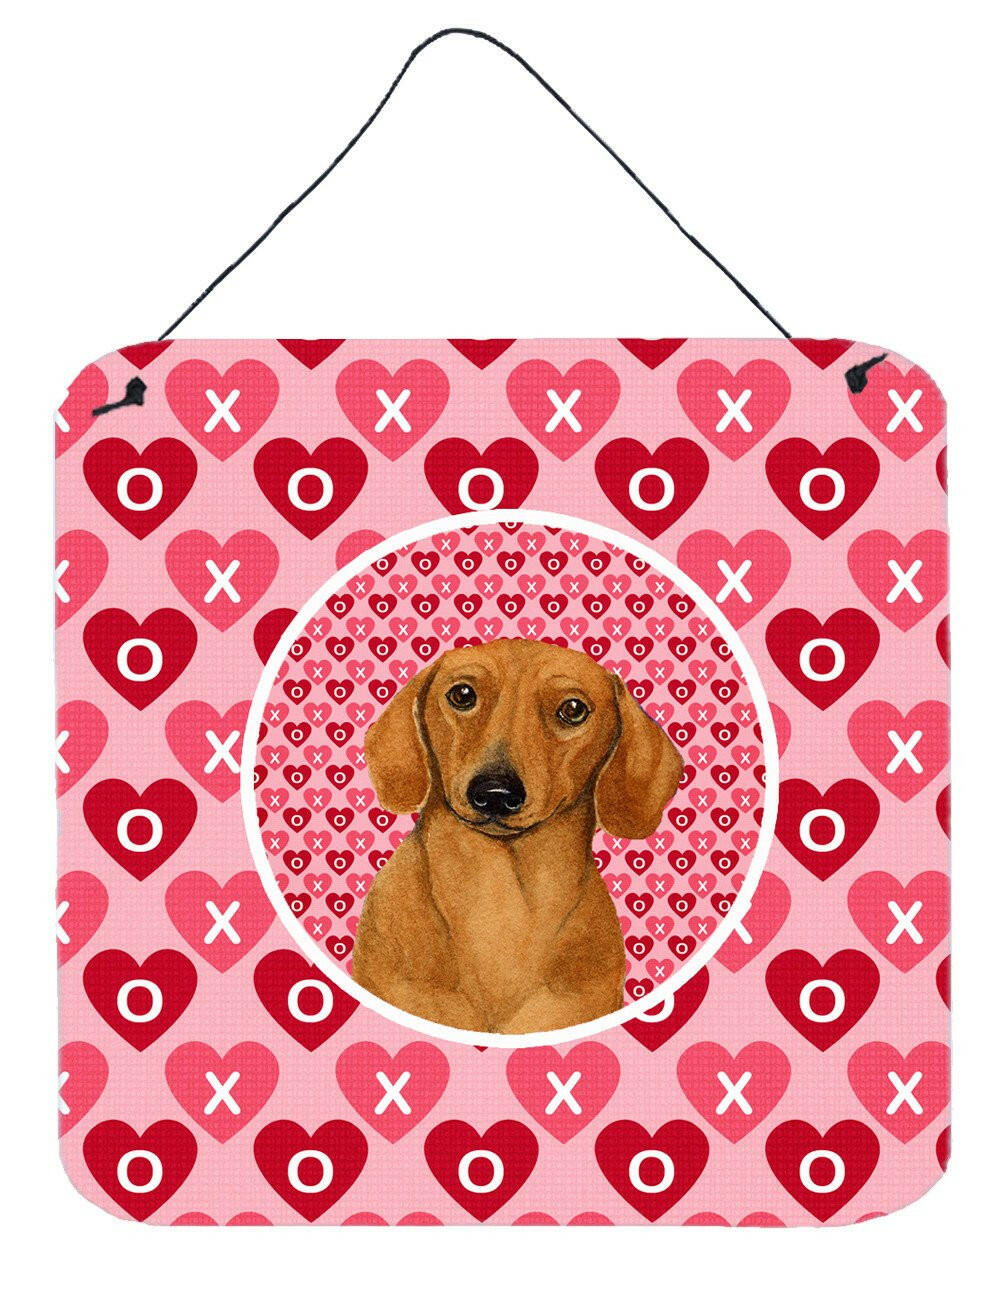 Dachshund Valentine's Love and Hearts Wall or Door Hanging Prints by Caroline's Treasures